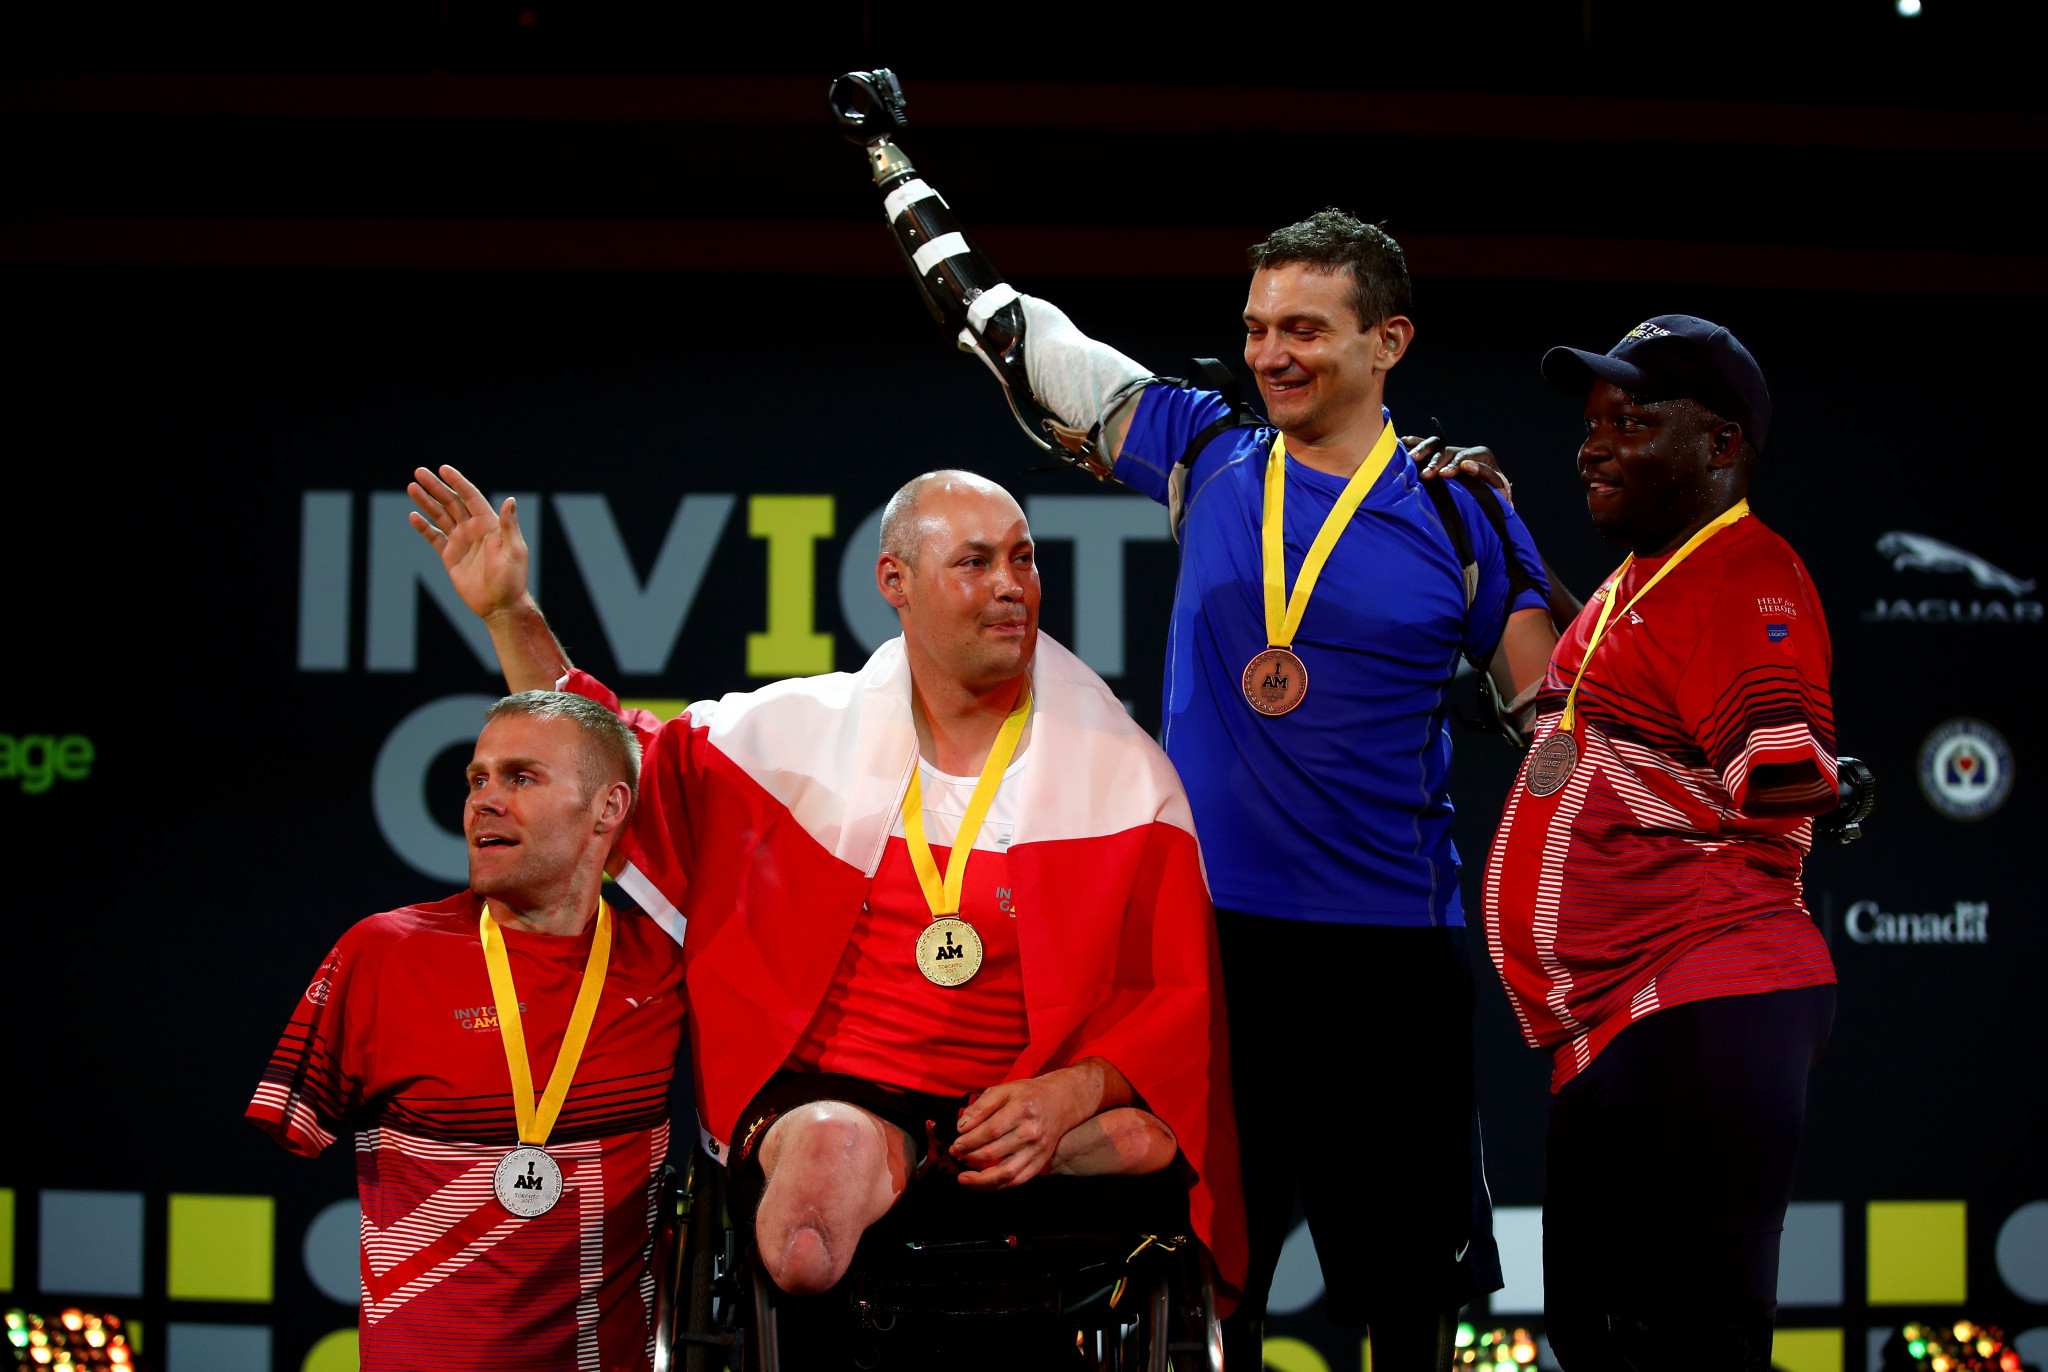 Michael Trauner, second from left, claimed two indoor rowing titles today ©Getty Images